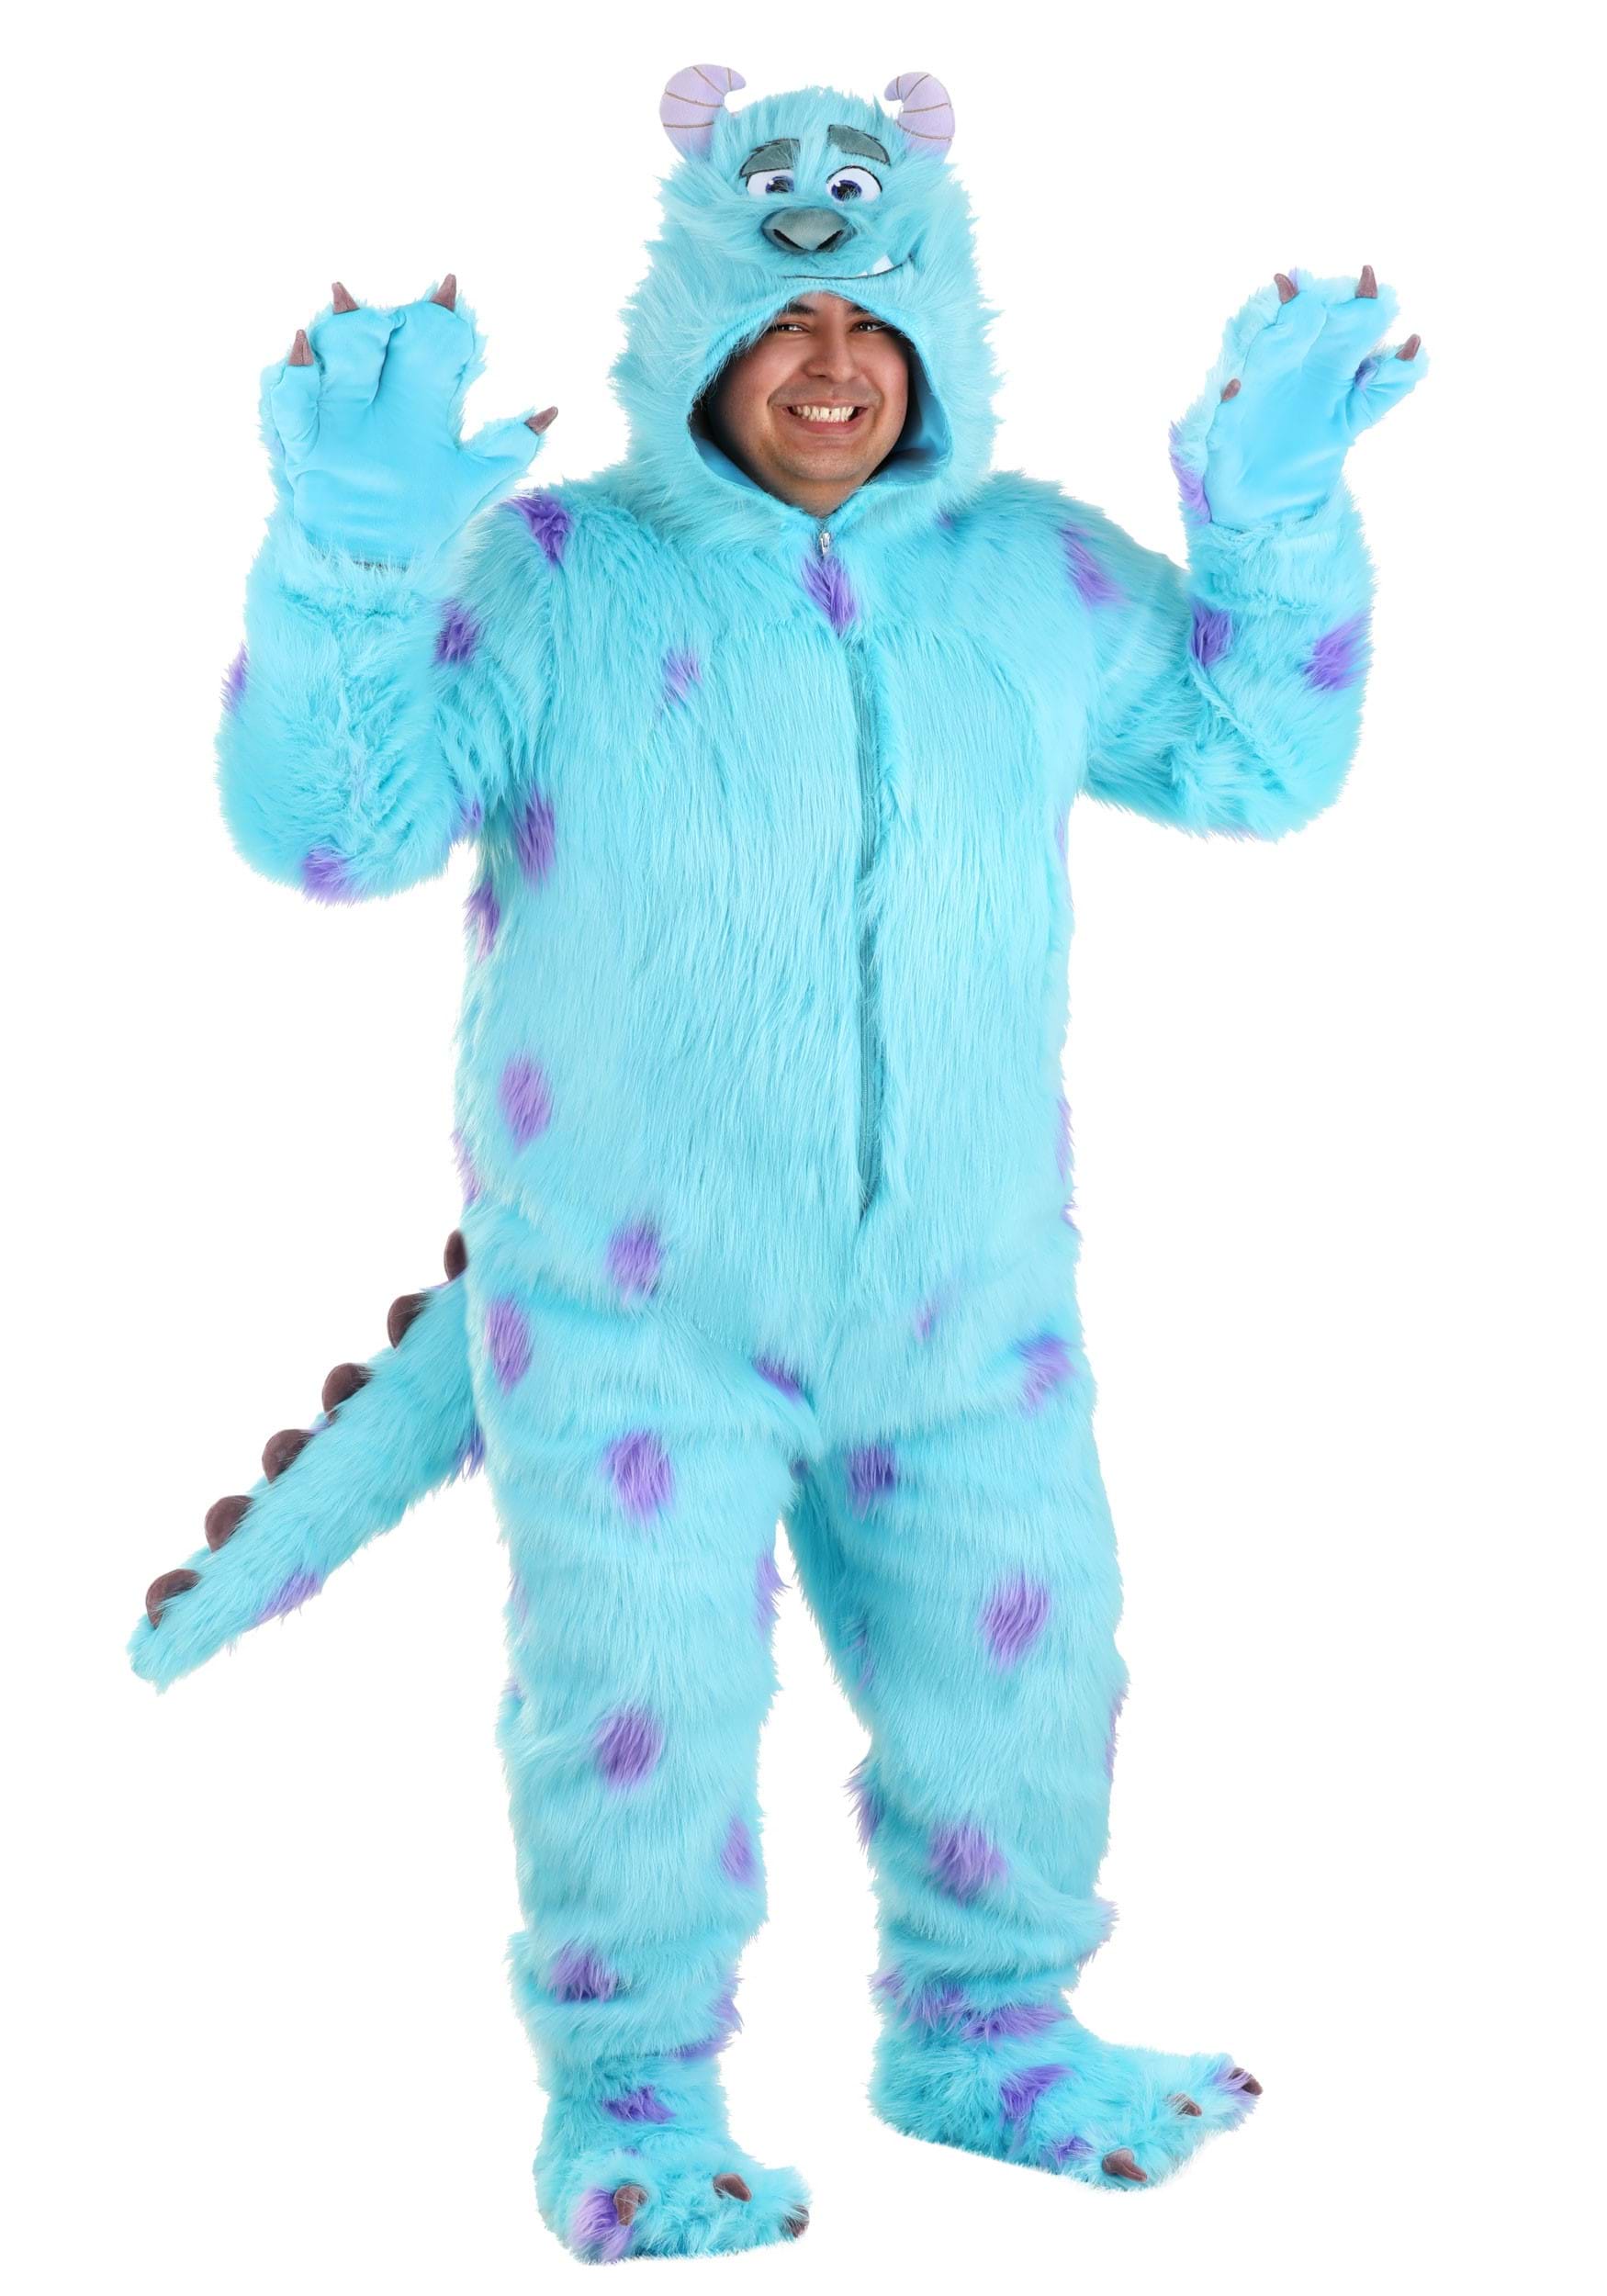 Plus Size Hooded Monsters Inc Sulley Costume for Adults | Disney Costumes